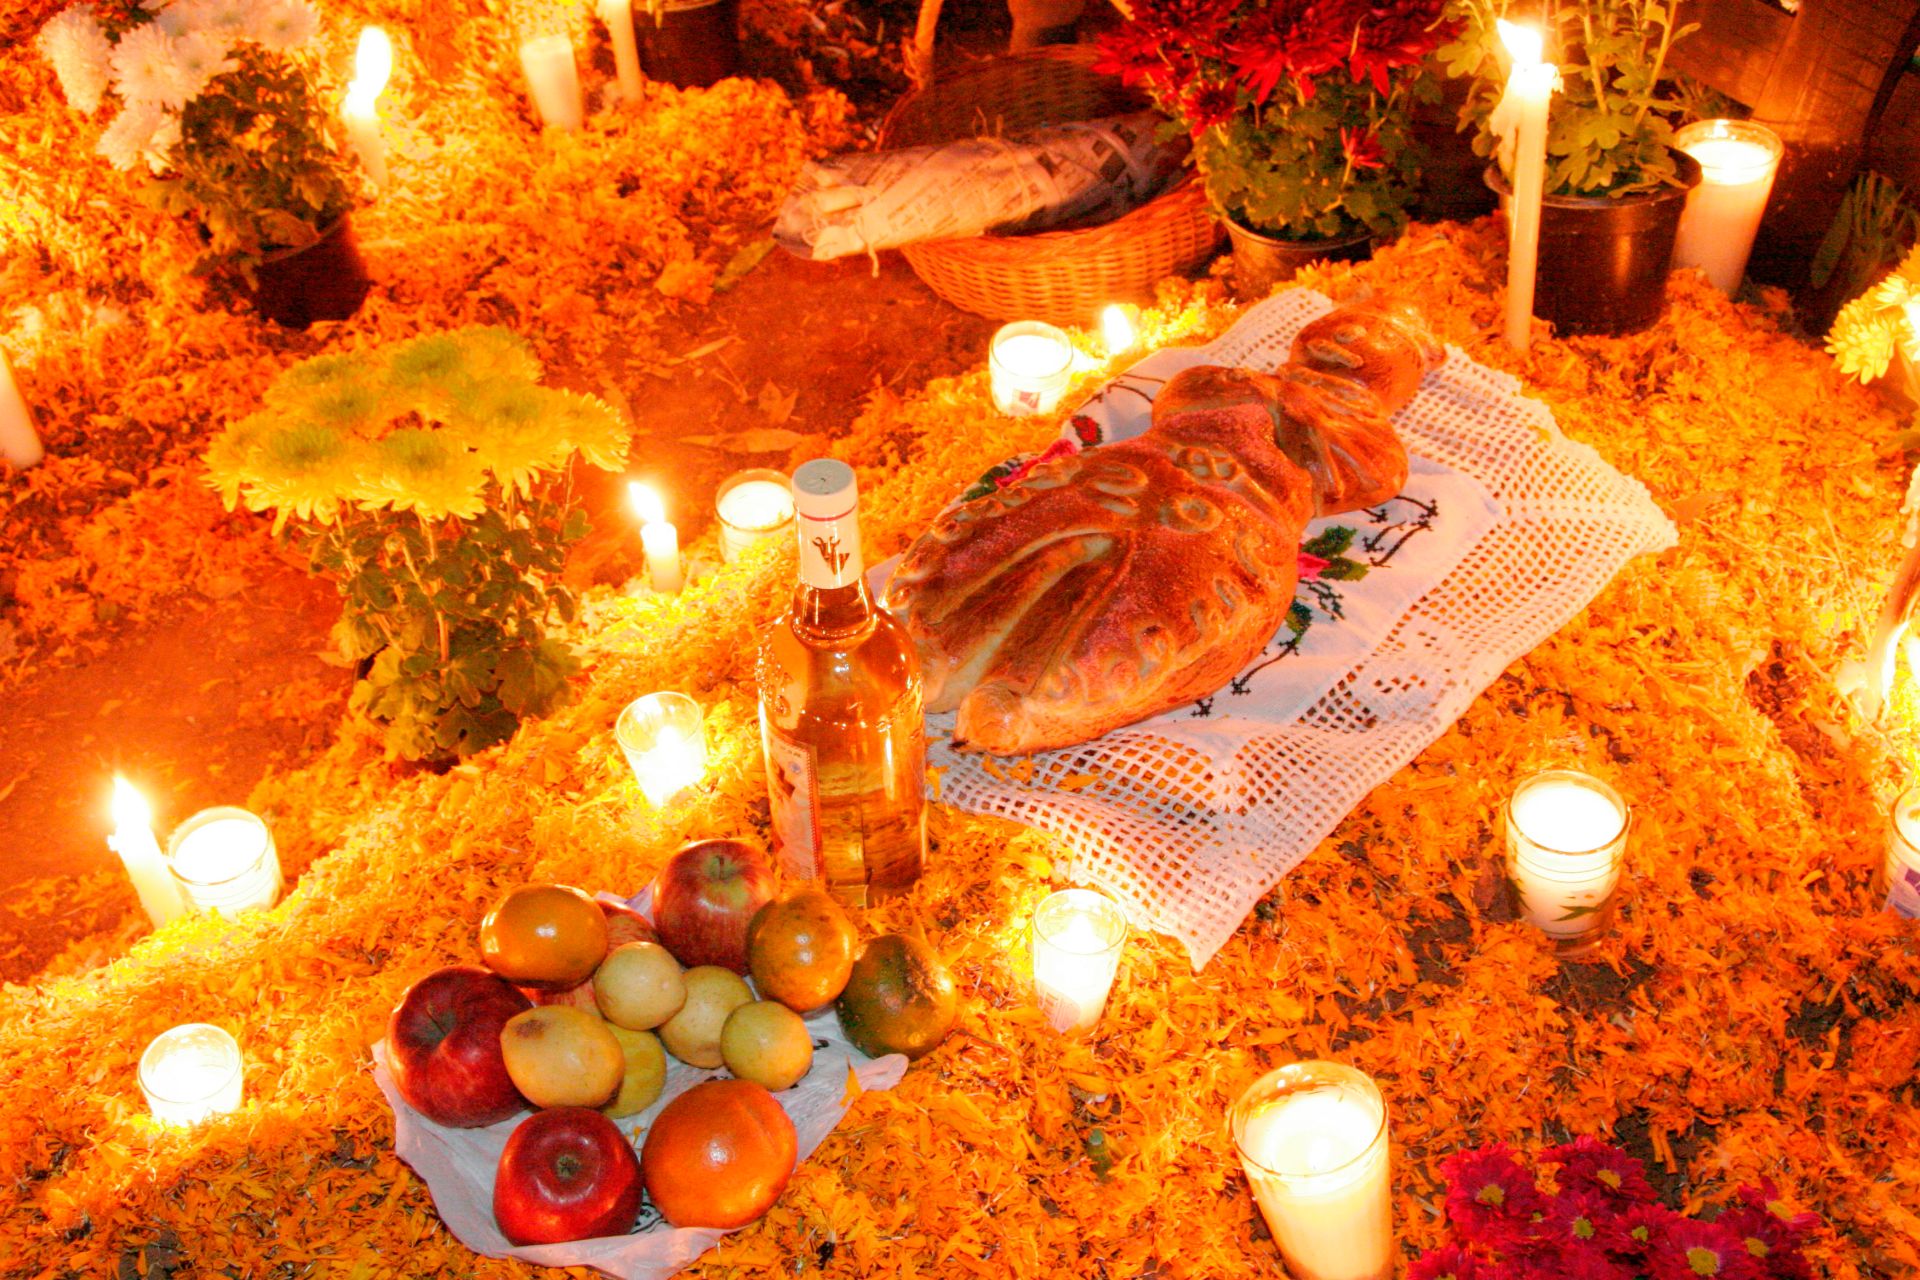 Pictures Of The Day Of The Dead